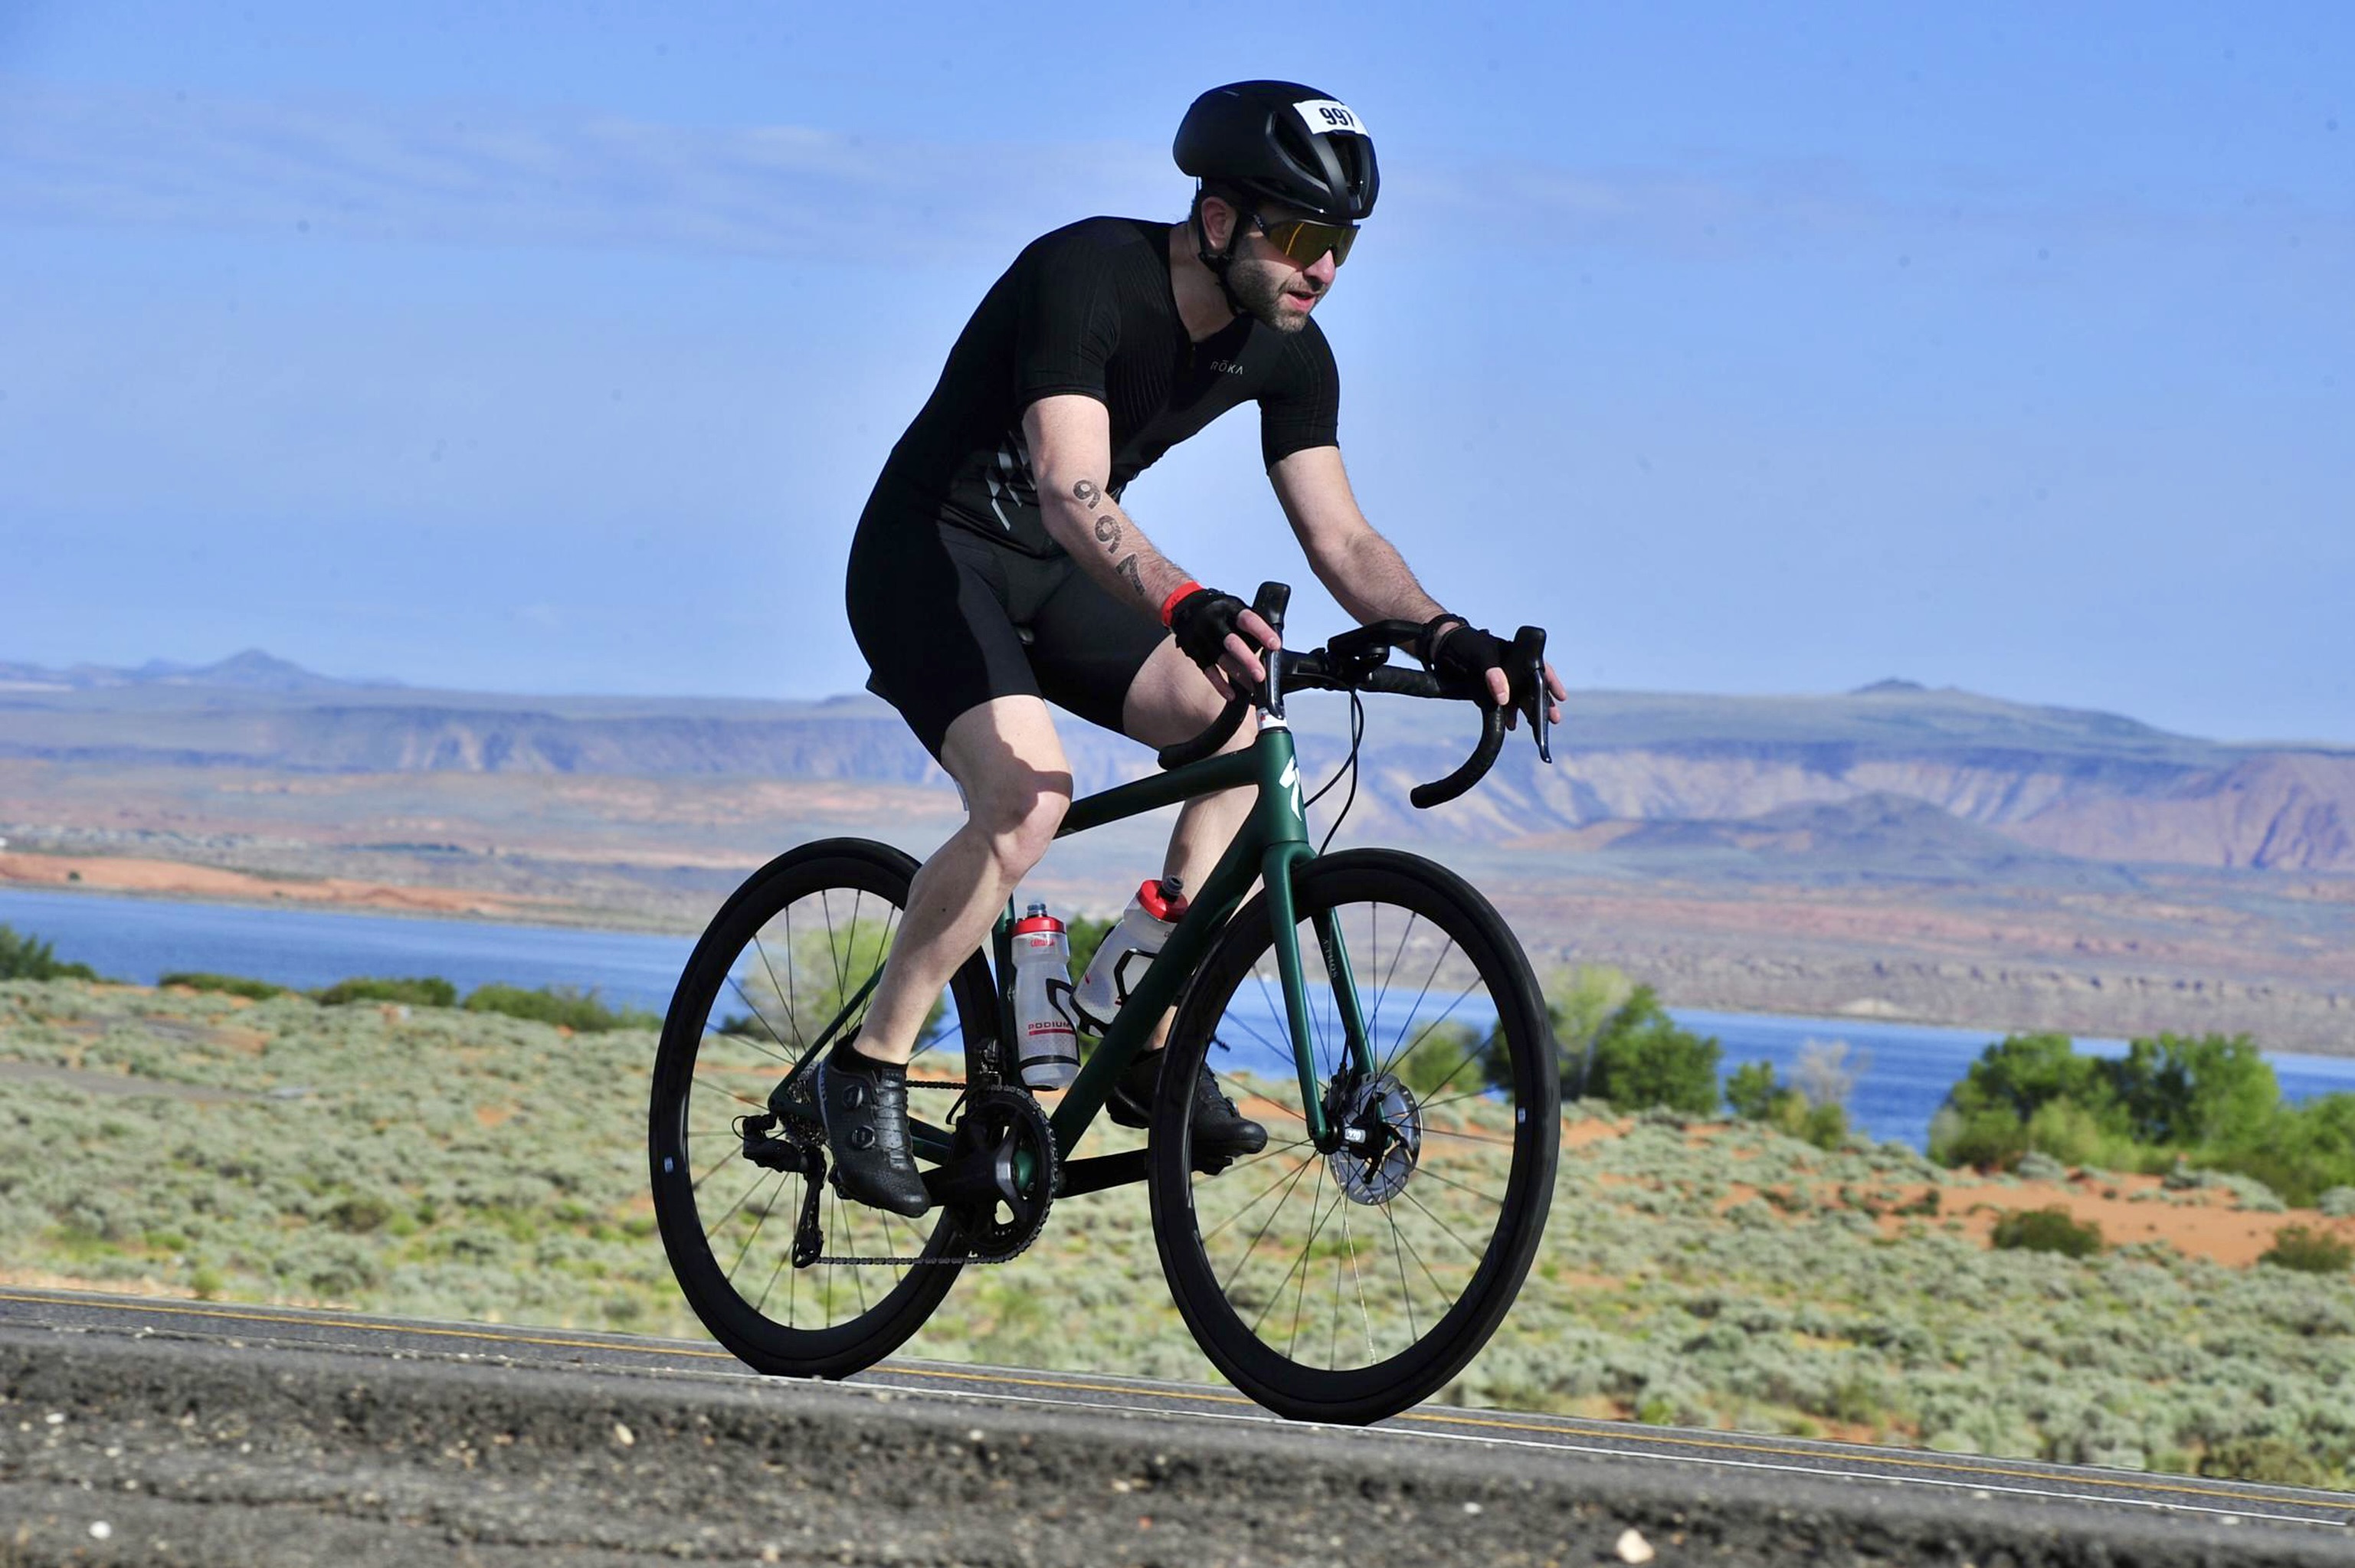 Me, riding a green Specialized Aethos bike through SR7 in Utah. The Sand Hollow reservoir and mountains can be seen in the background, under clear blue skies. I'm wearing a black helmet, black trisuit, black gloves, black shoes, and gold sunglasses. I have a race tattoo in my right arm with the number 997.